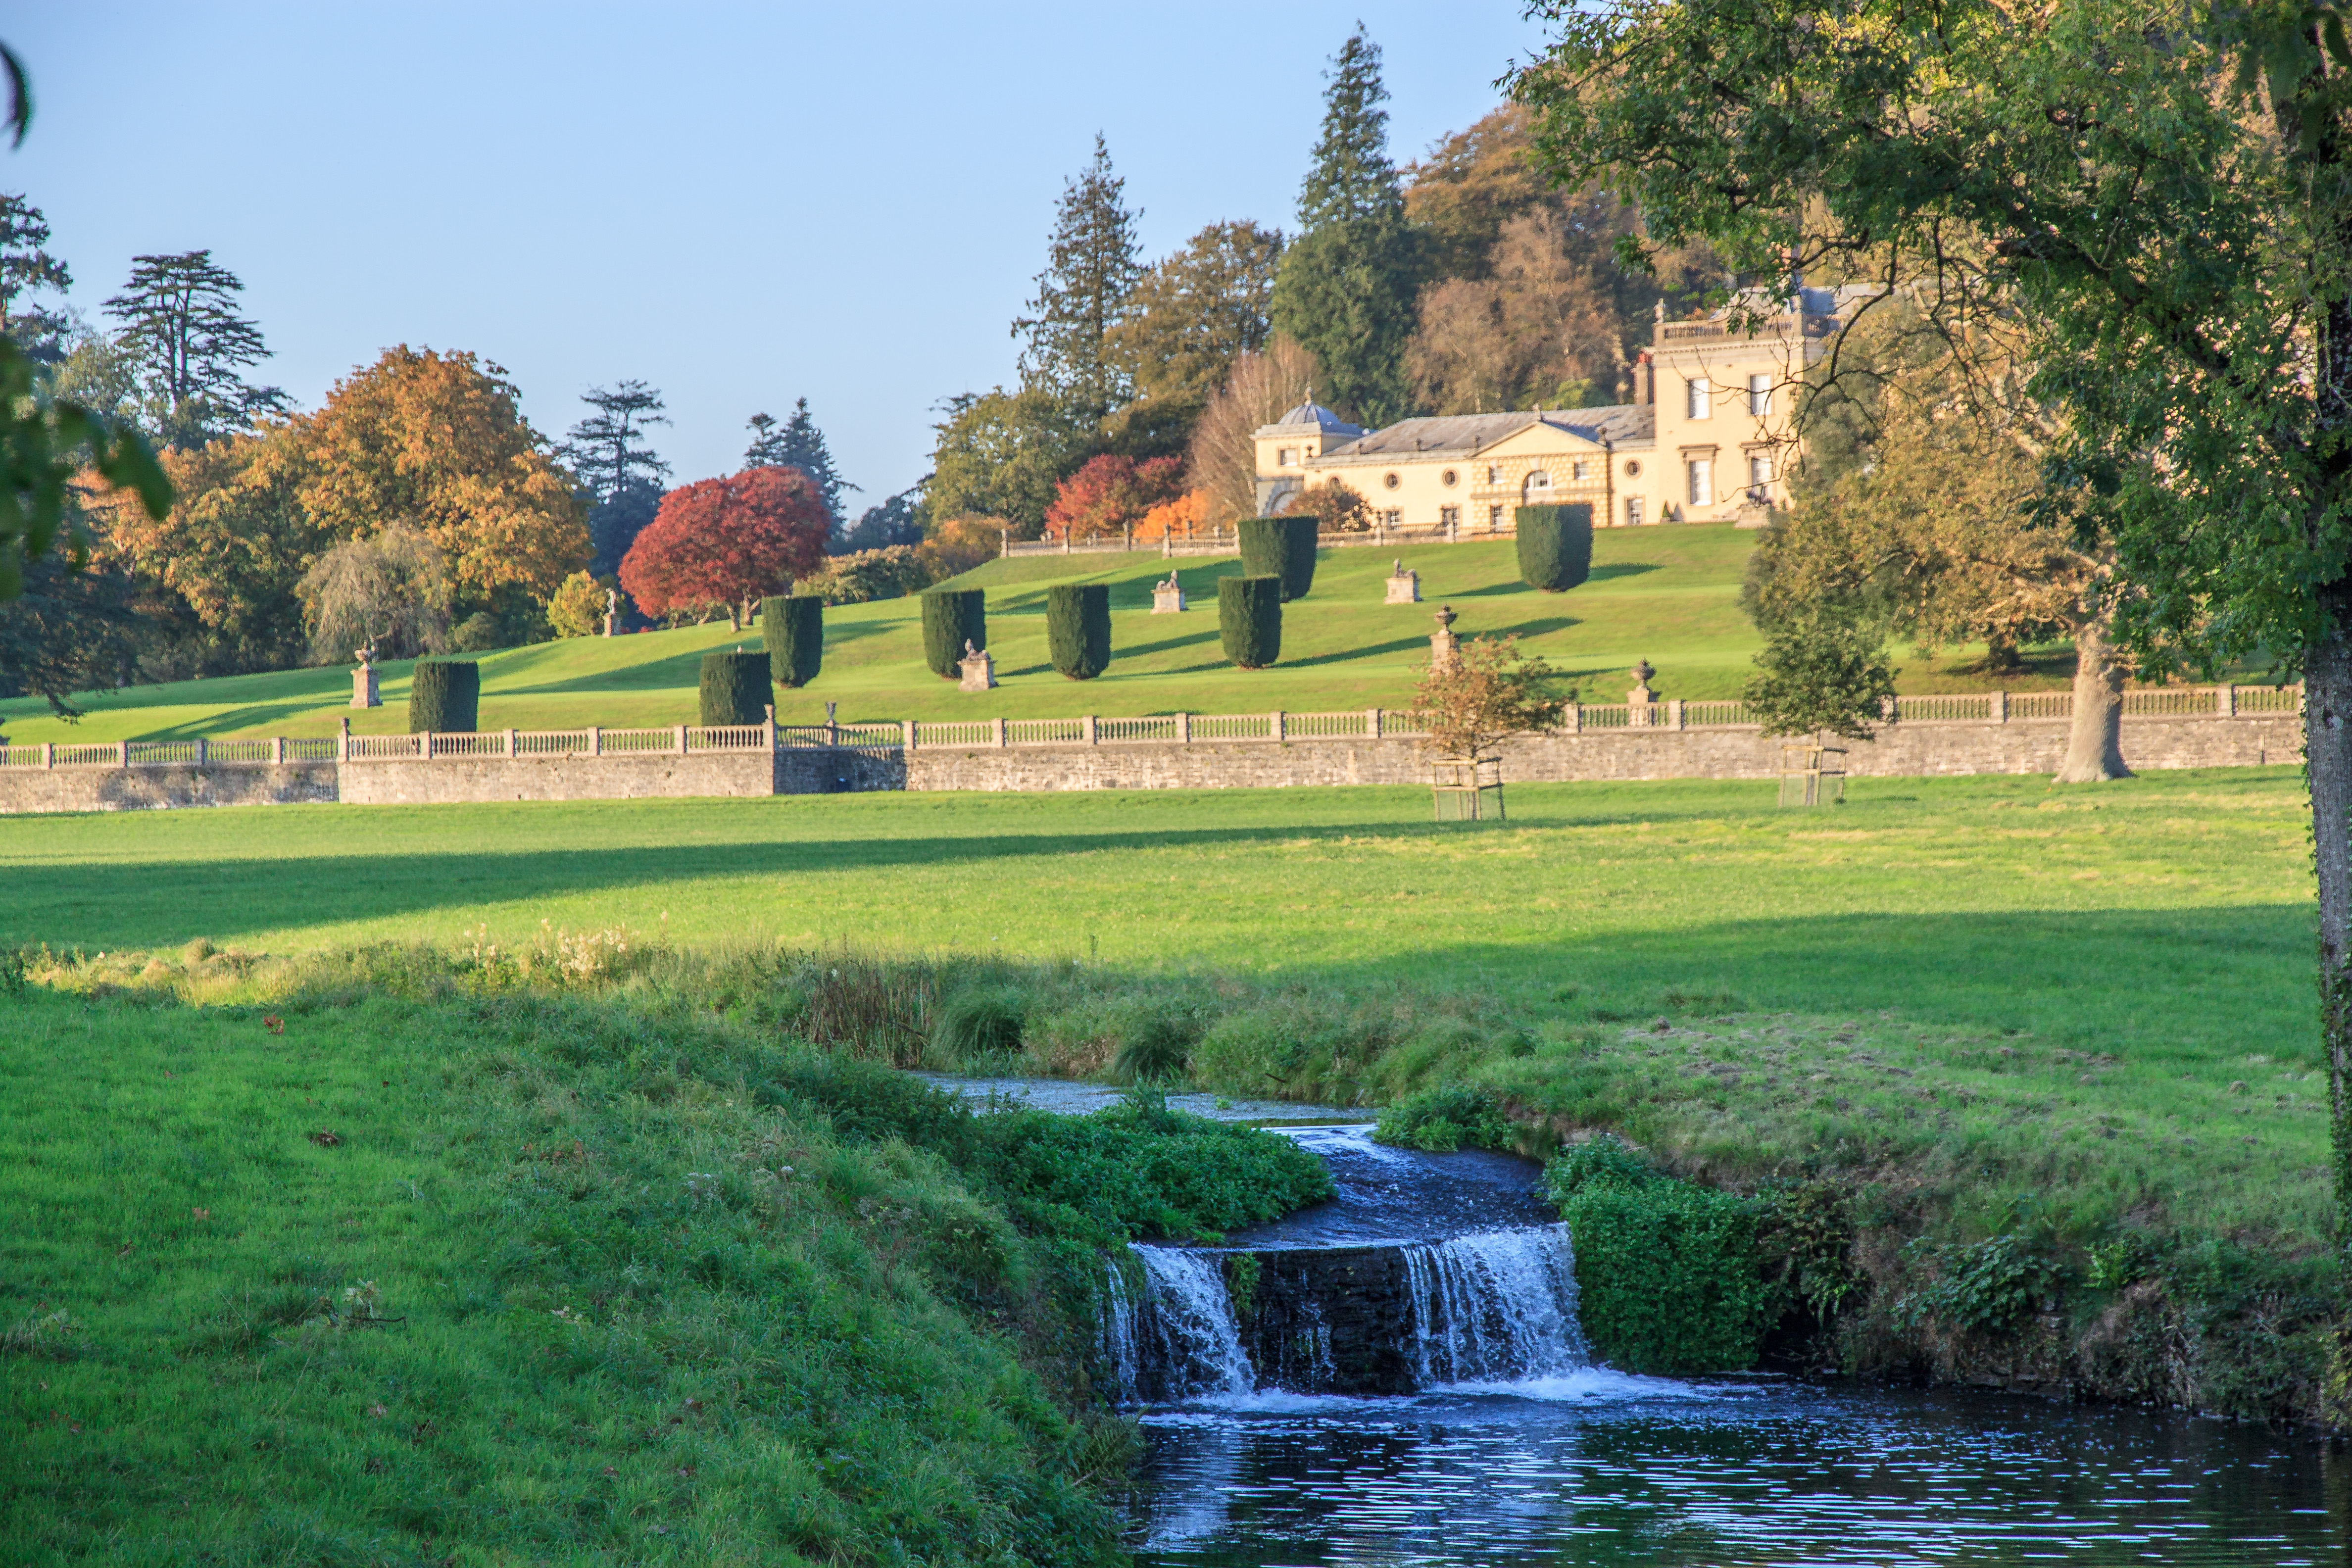 Castle Hill House and Gardens near South Molton in October